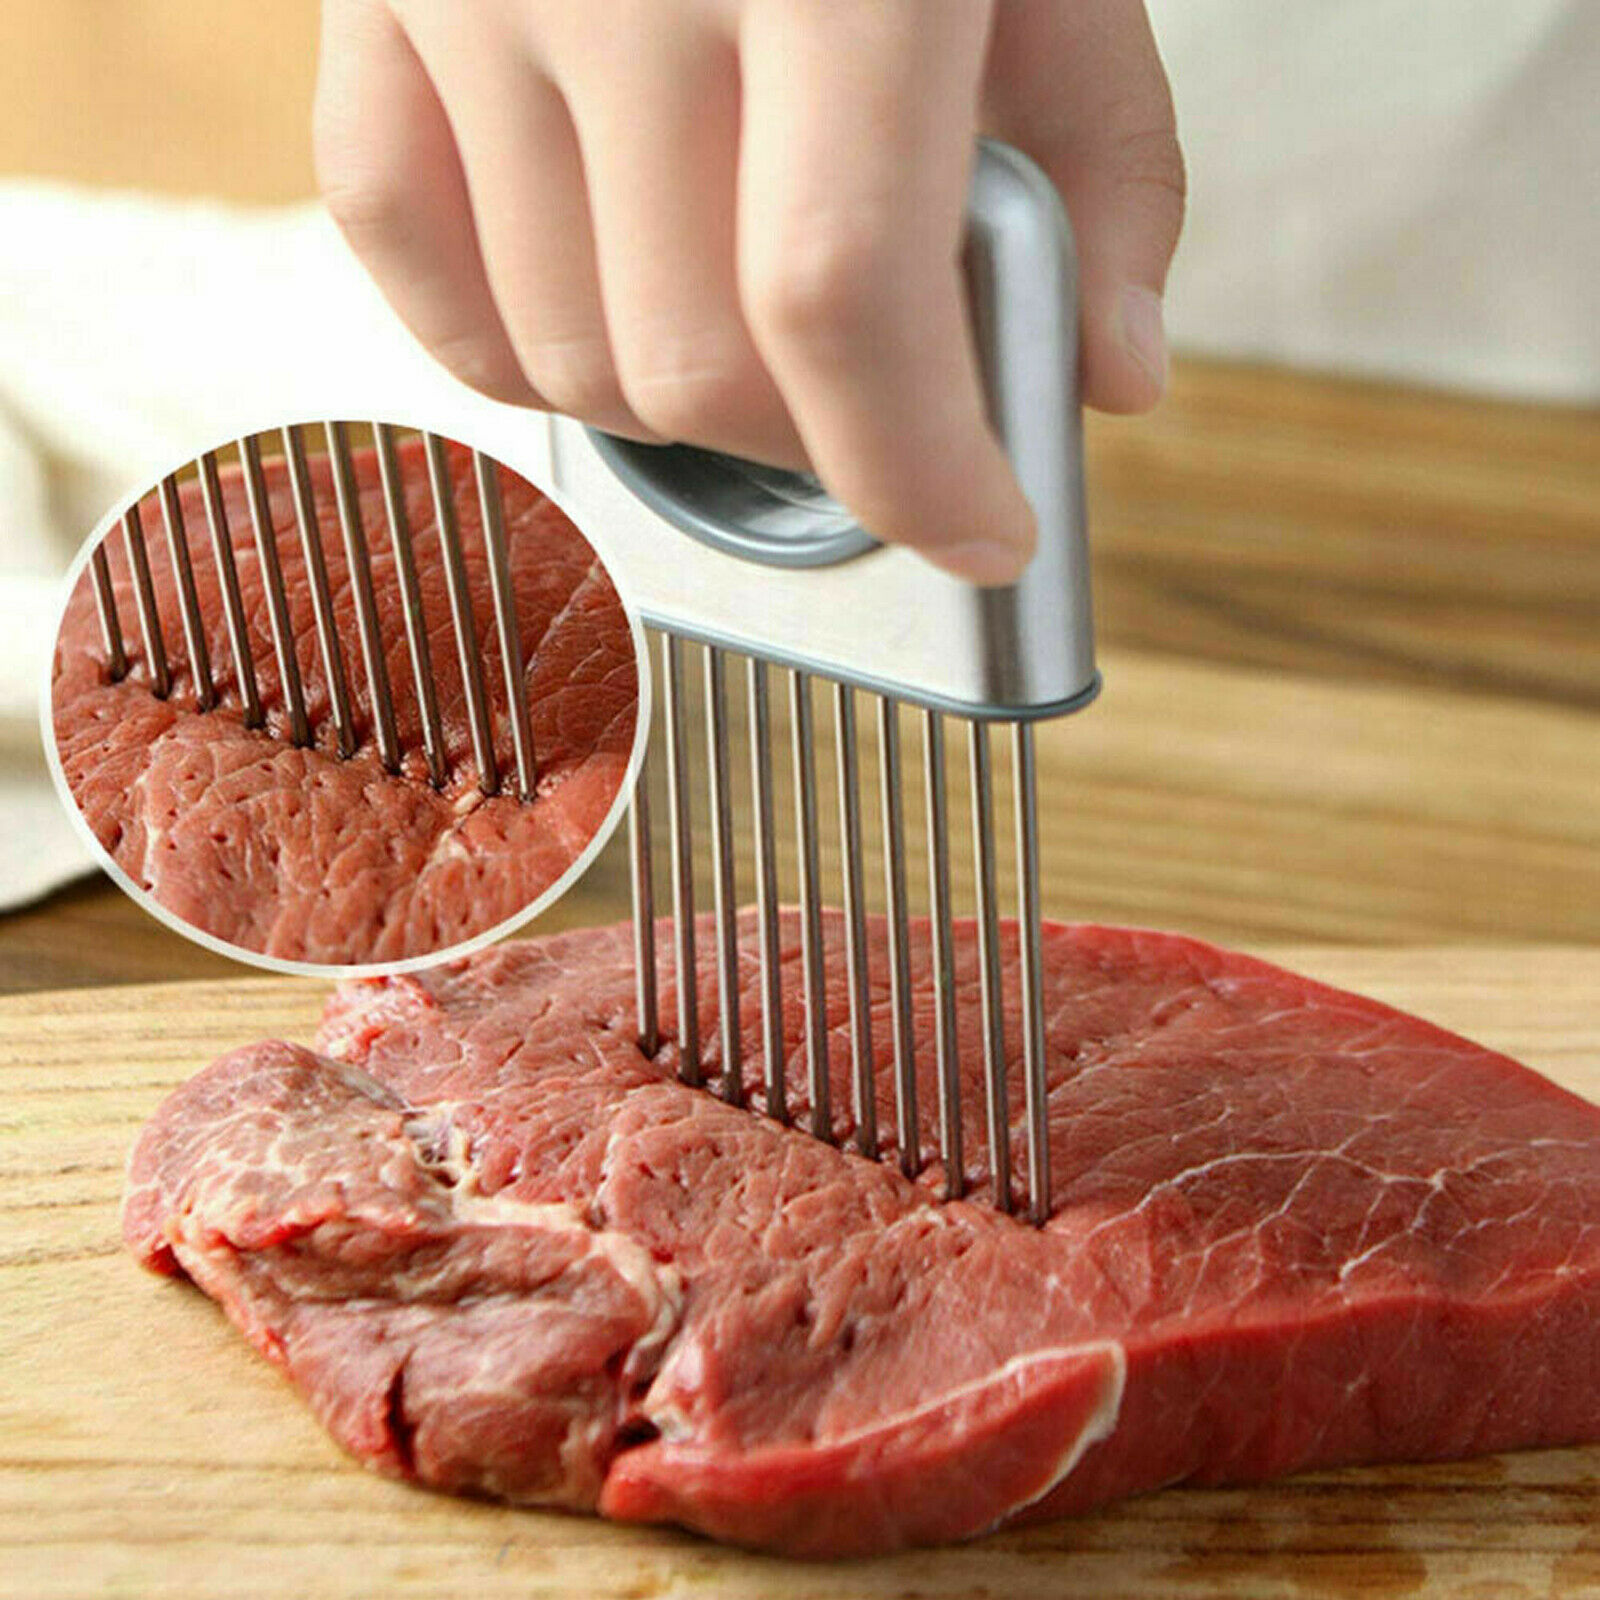 Kitchen Gadgets Handy Stainless Steel Onion Holder Potato Tomato Slicer Vegetable Fruit Cutter Safety Cooking Tools